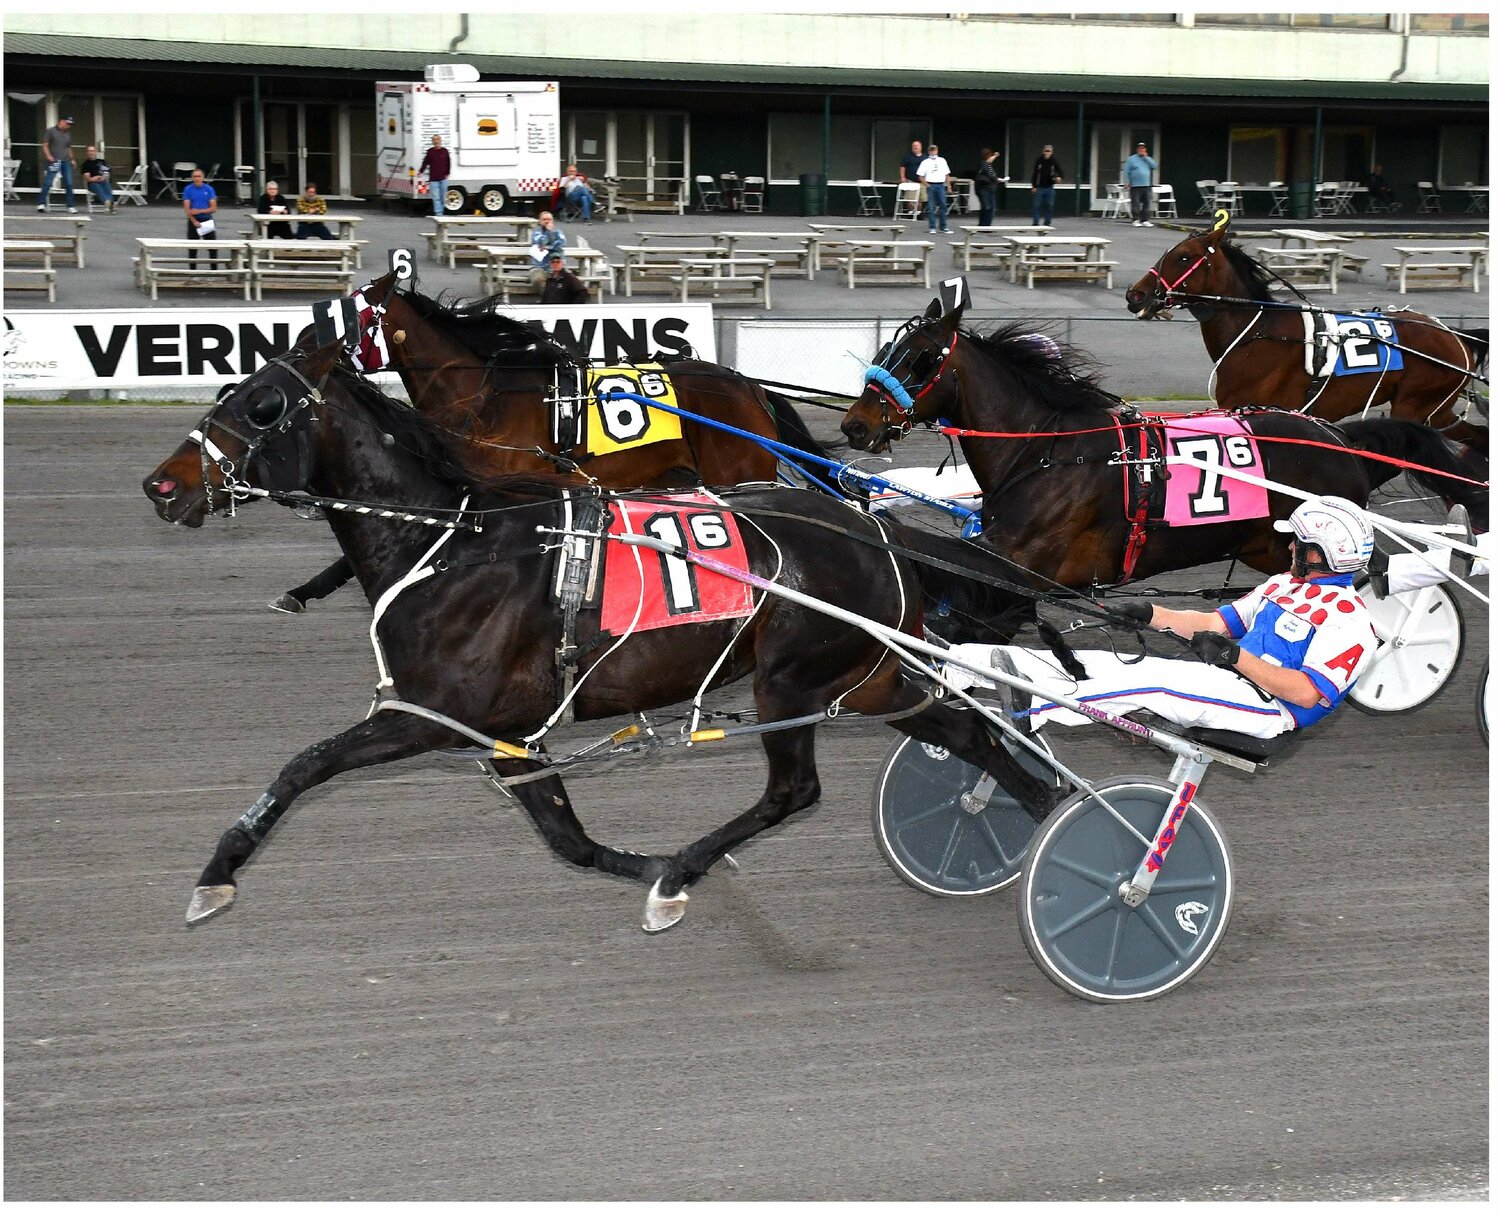 Lorrie Sue with driver Frank Affrunti charged late to capture the $6,500 fillies and mare pace on Friday at Vernon Downs.